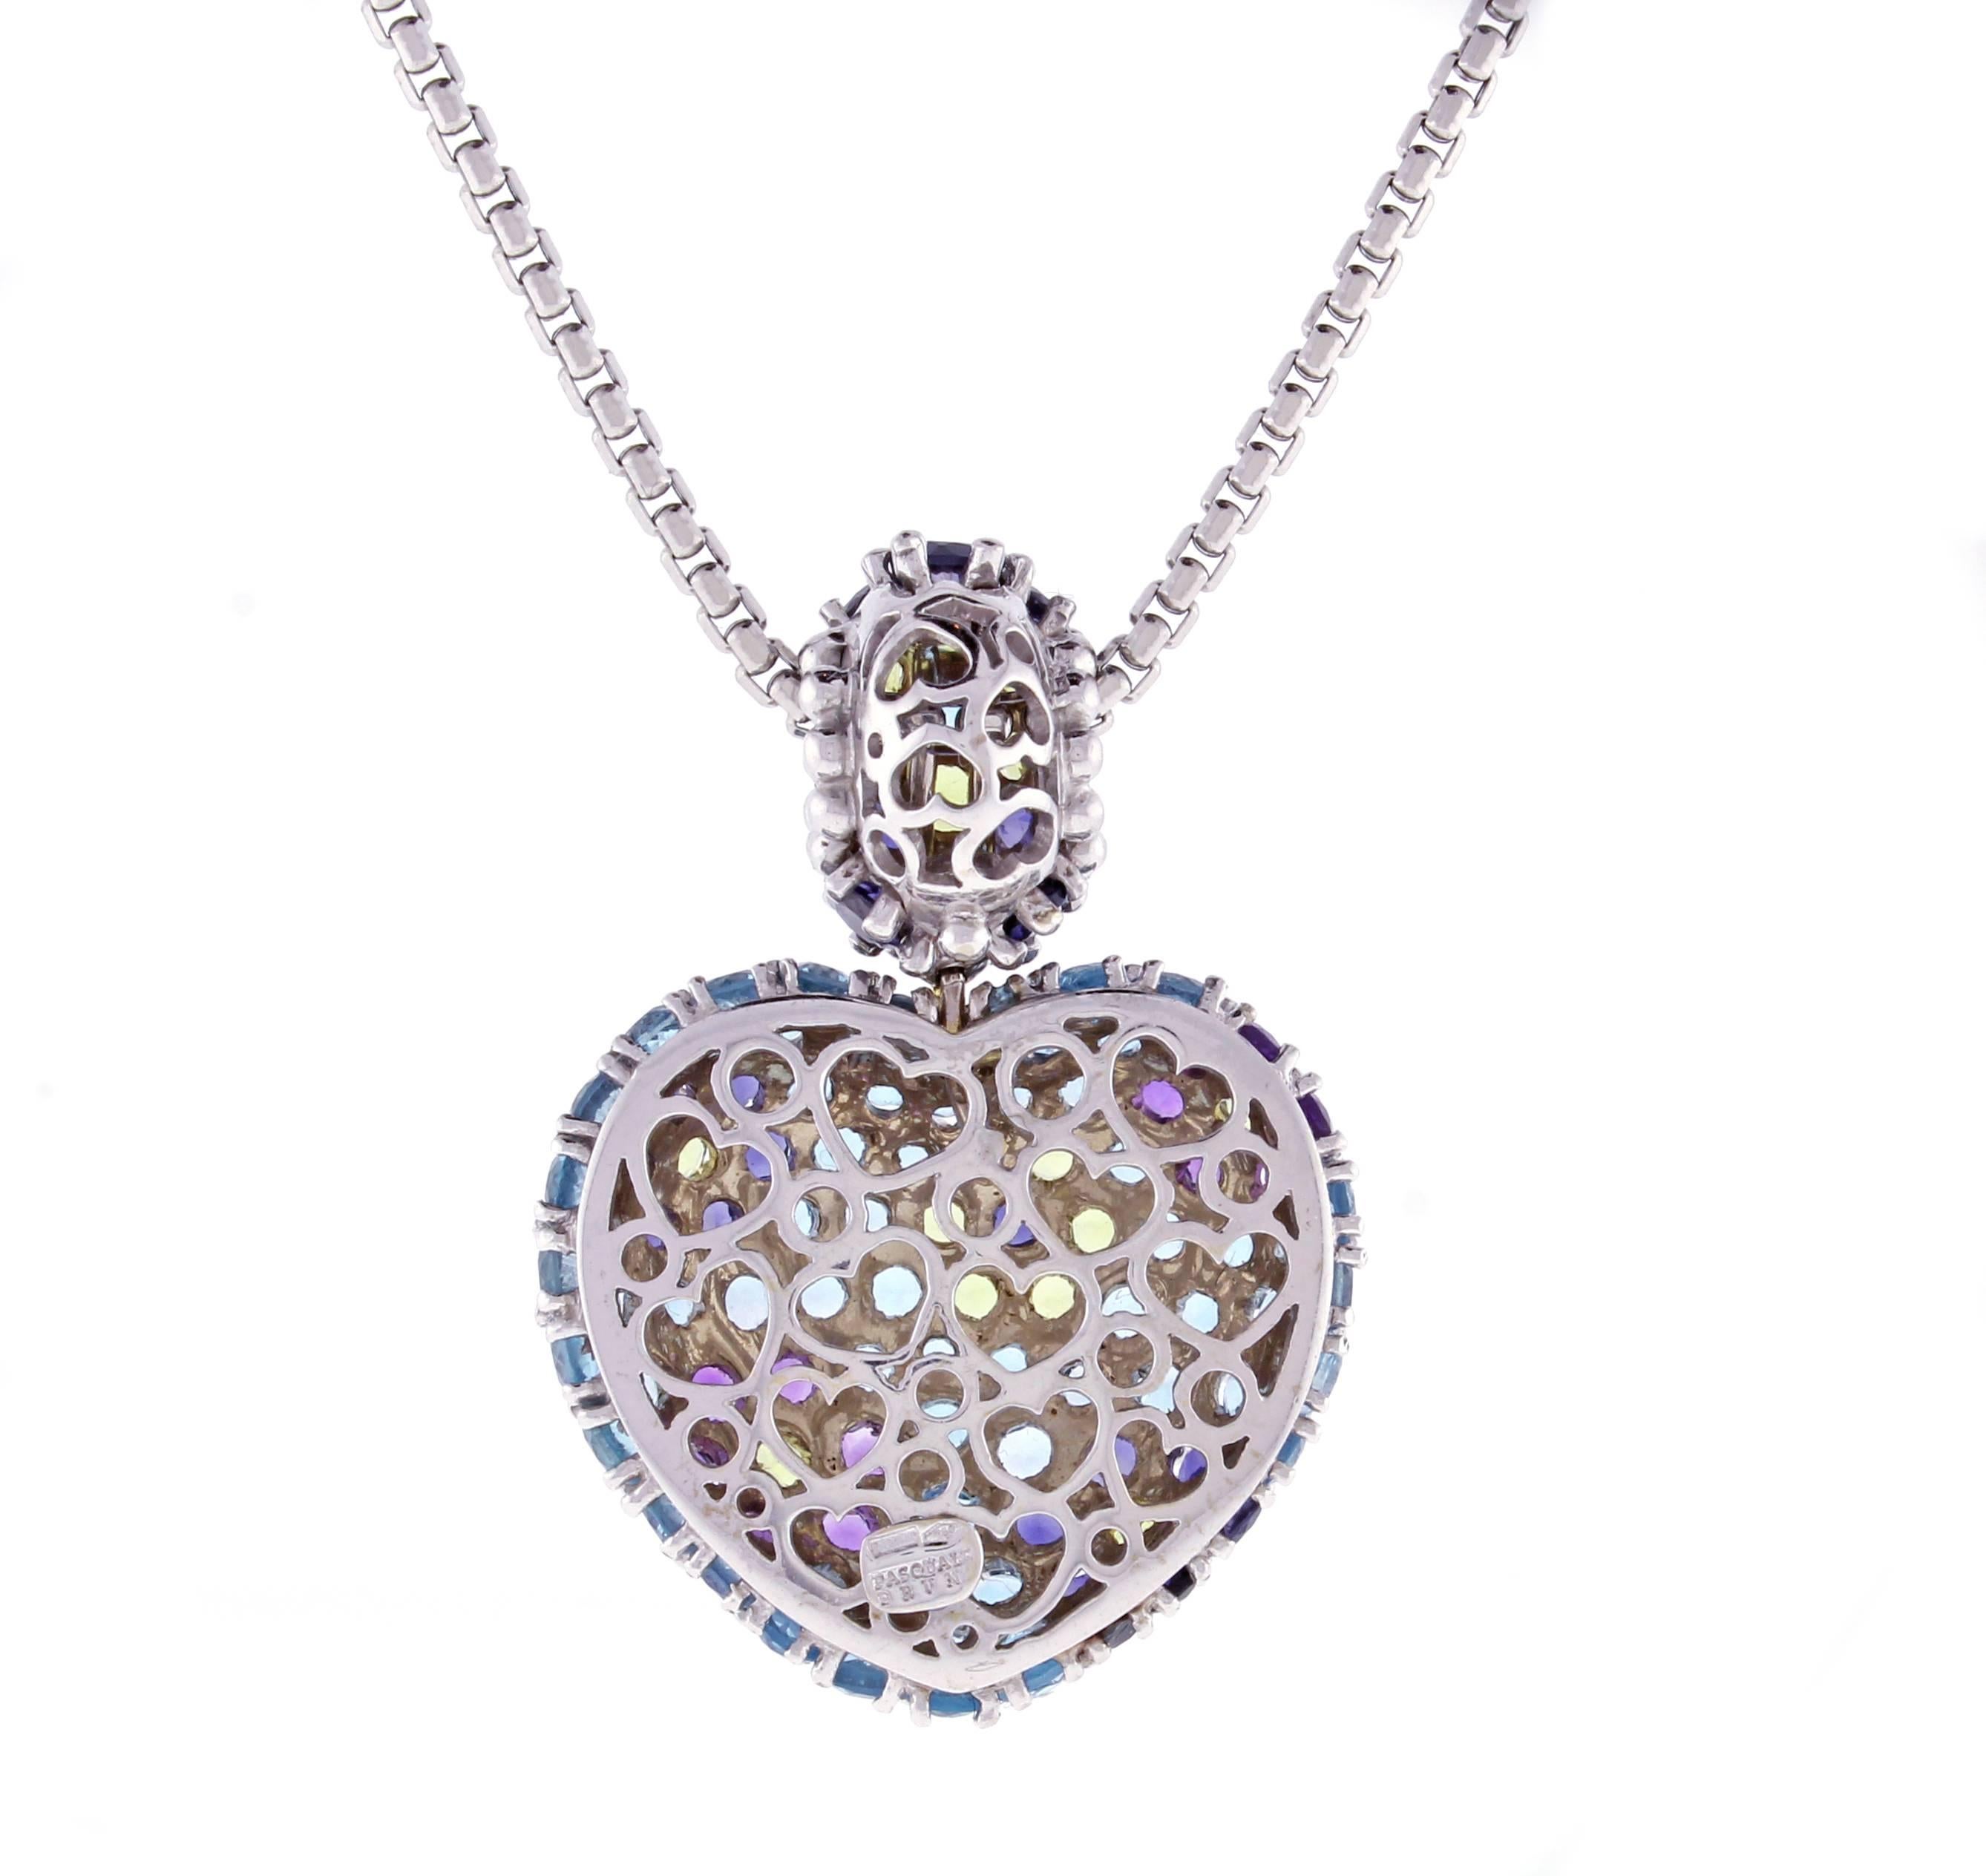 From acclaimed Italian designer Pasquale Bruni, a stunning wide multi gemstone heart pendant. The pendant features vibrate tanzanite, tourmaline, topaz, peridot and amethyst.  Measuring 1¼ of an inch wide and 2¾ of an inch high. Set in 18 karat